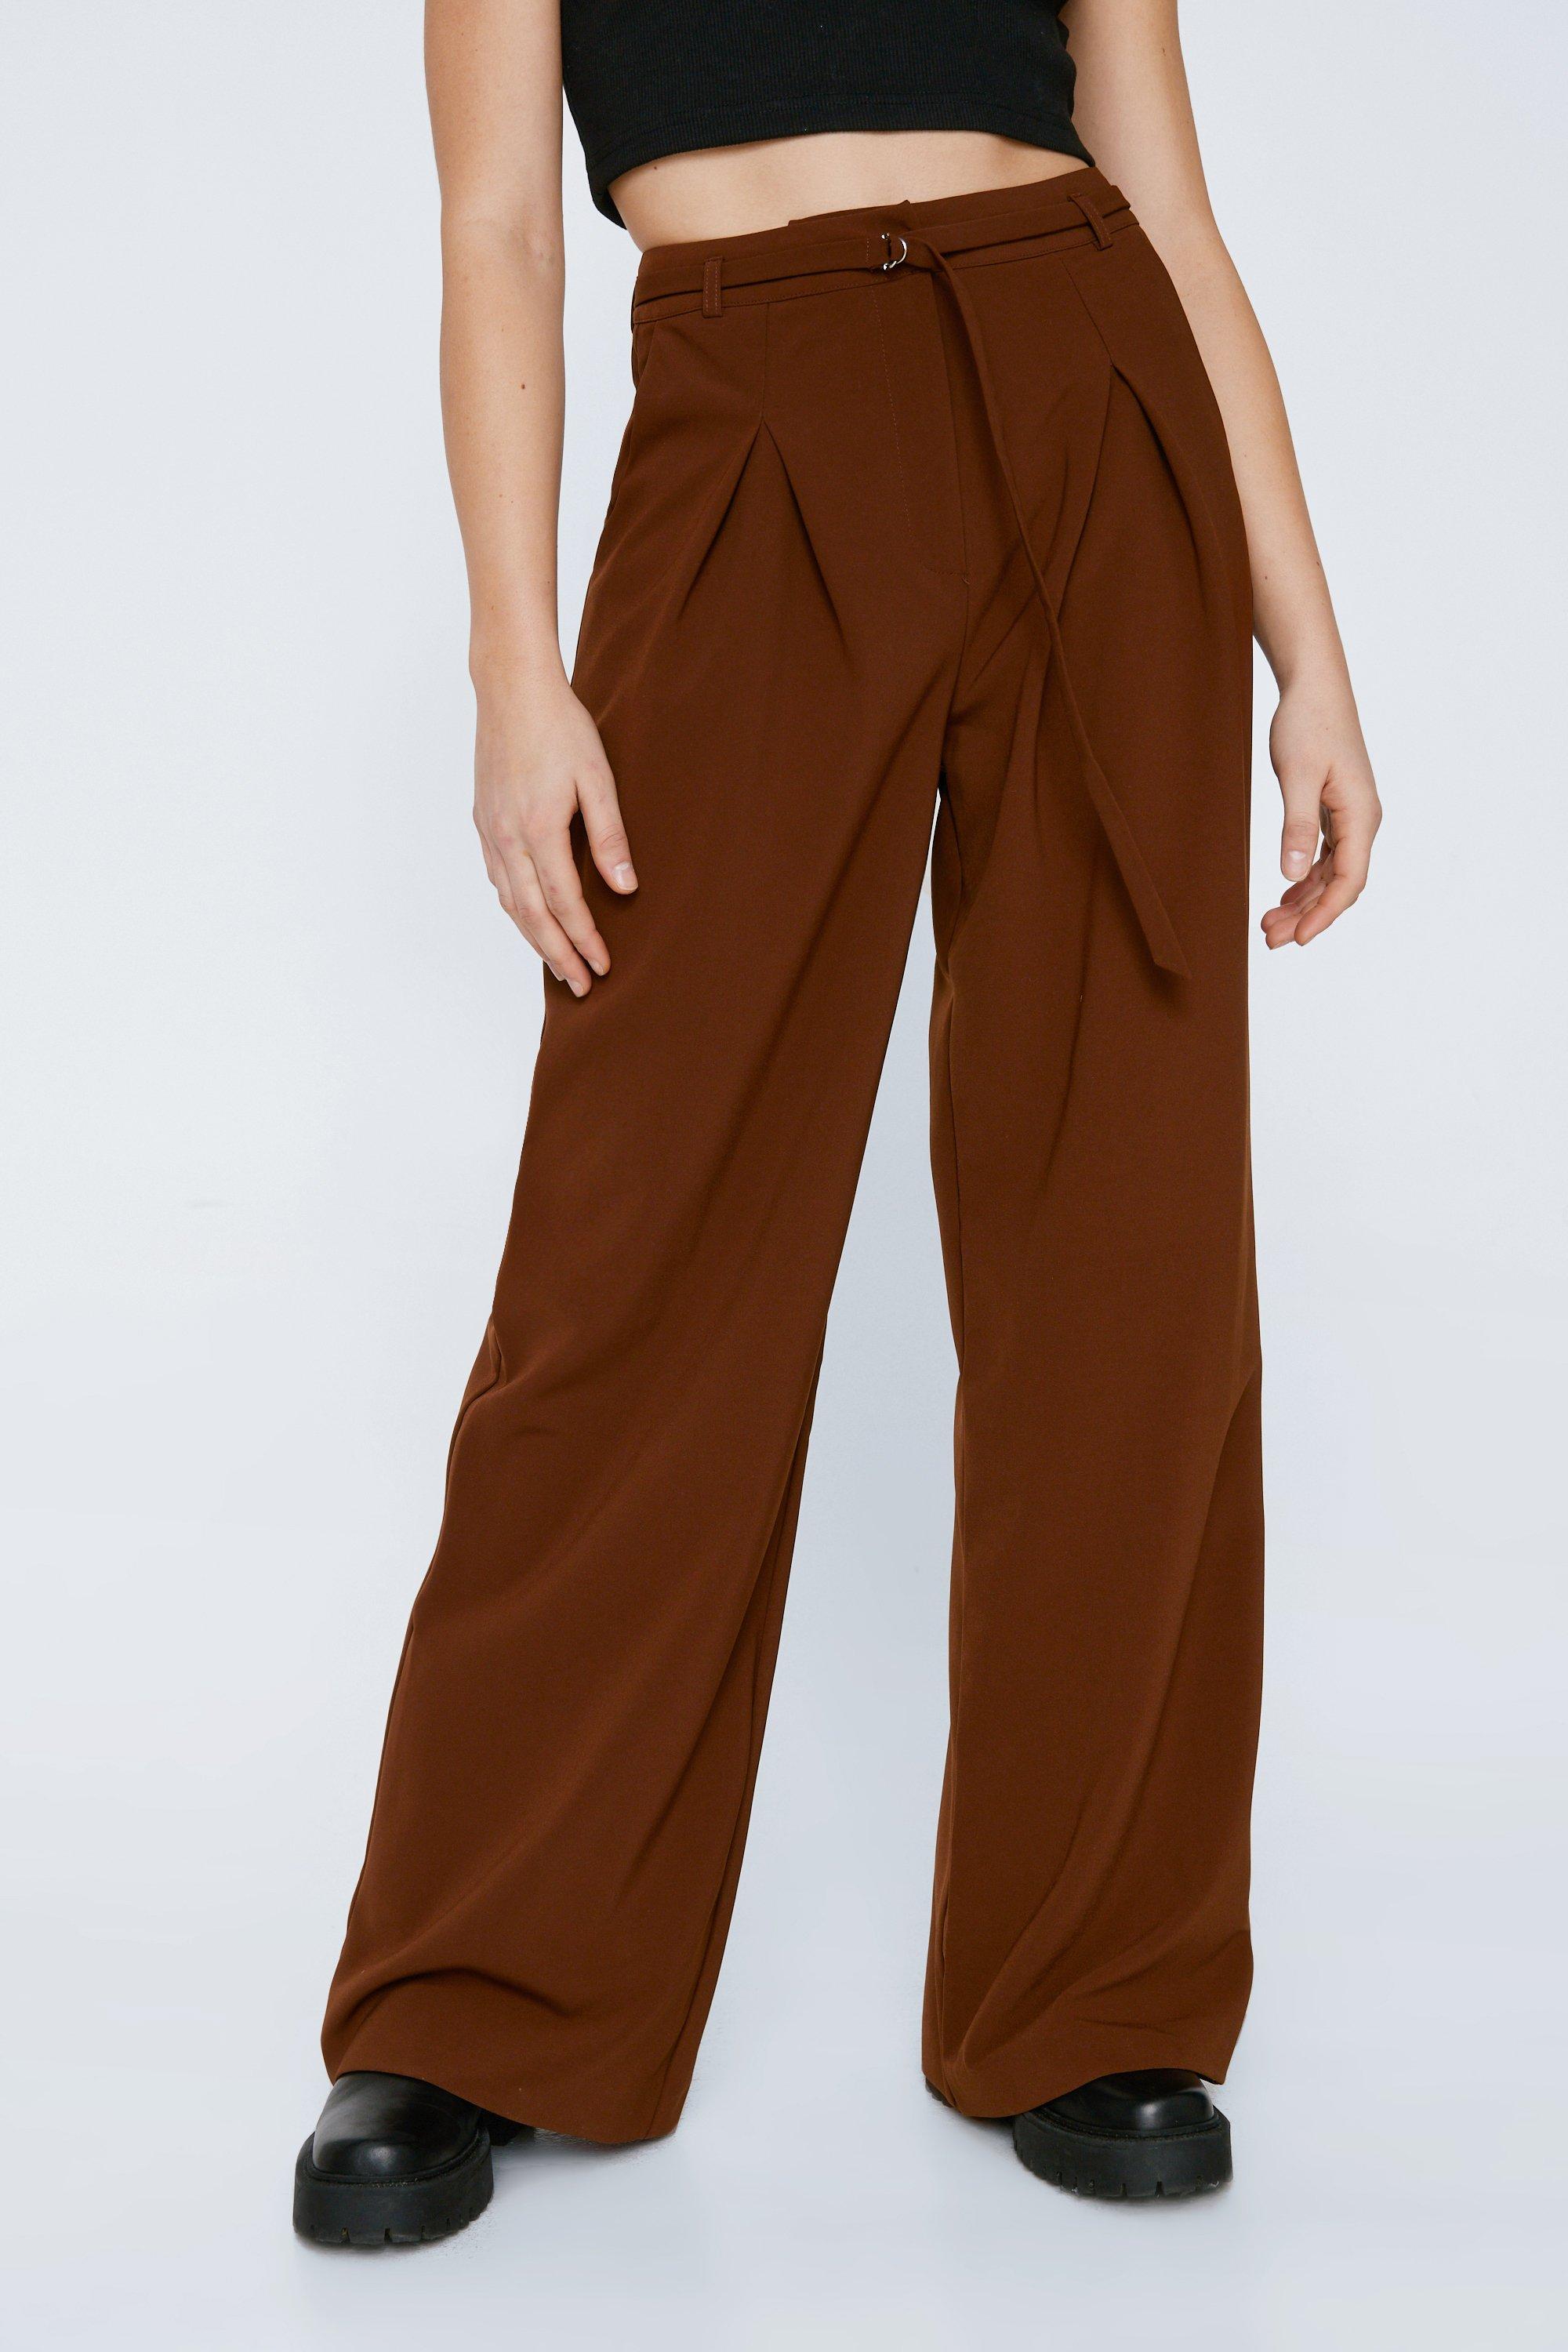 Buckle Belt High Waisted Pants - S / Red